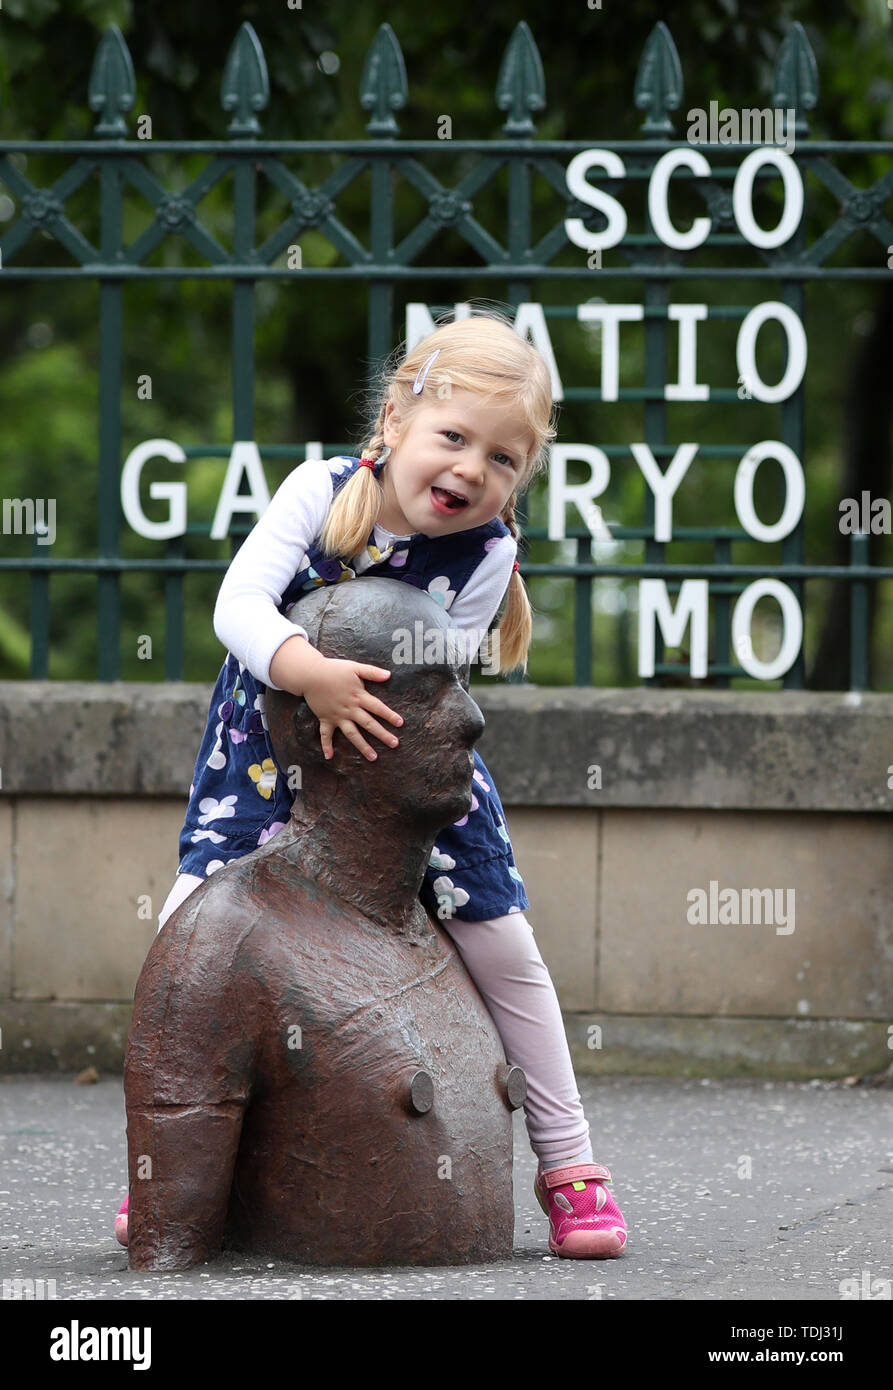 Phoebo Chisholm, 3, takes a closer look at 'Goma Man' one of six life-size iron figures by artist Antony Gormley that forms part of the installation '6 Times' which marks out a watery route along Edinburgh's Water of Leith from the Scottish National Gallery of Modern Art to the sea at Leith Docks. Stock Photo